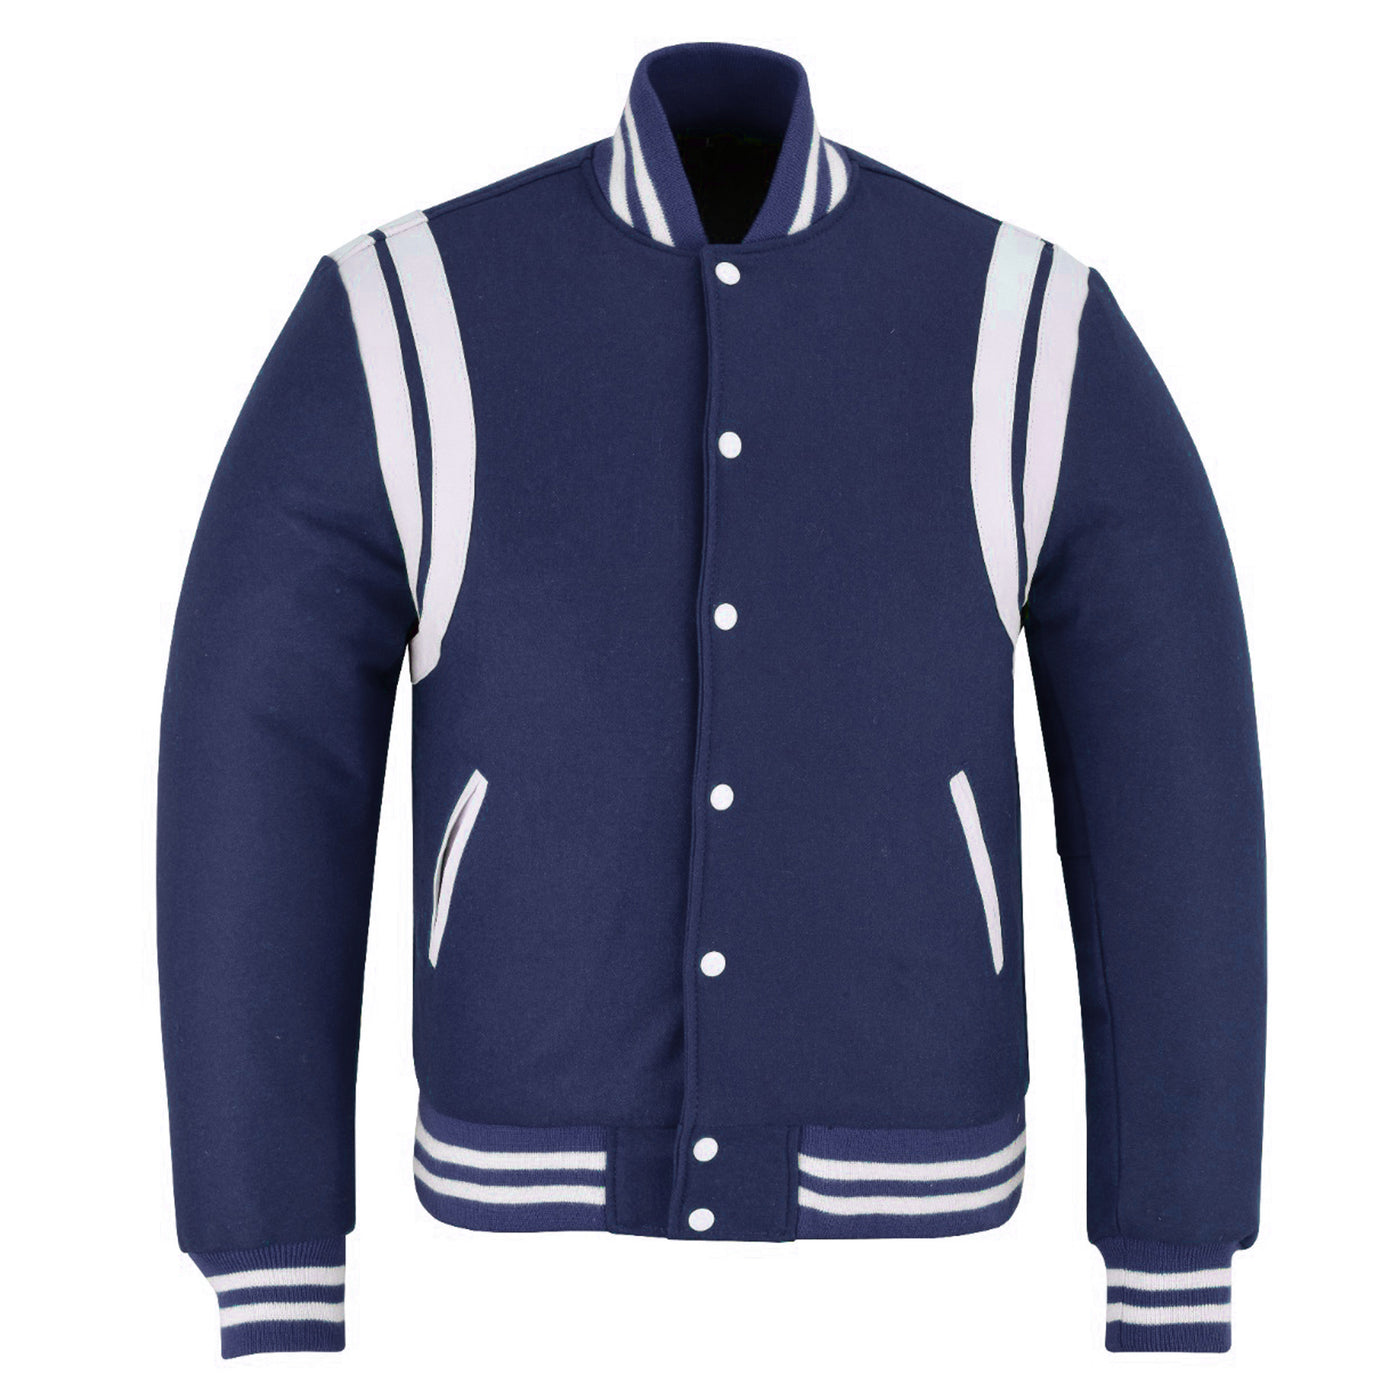 Classic Varisty Letterman Baseball College Jacket Navy Wool with White Double Leather Strip